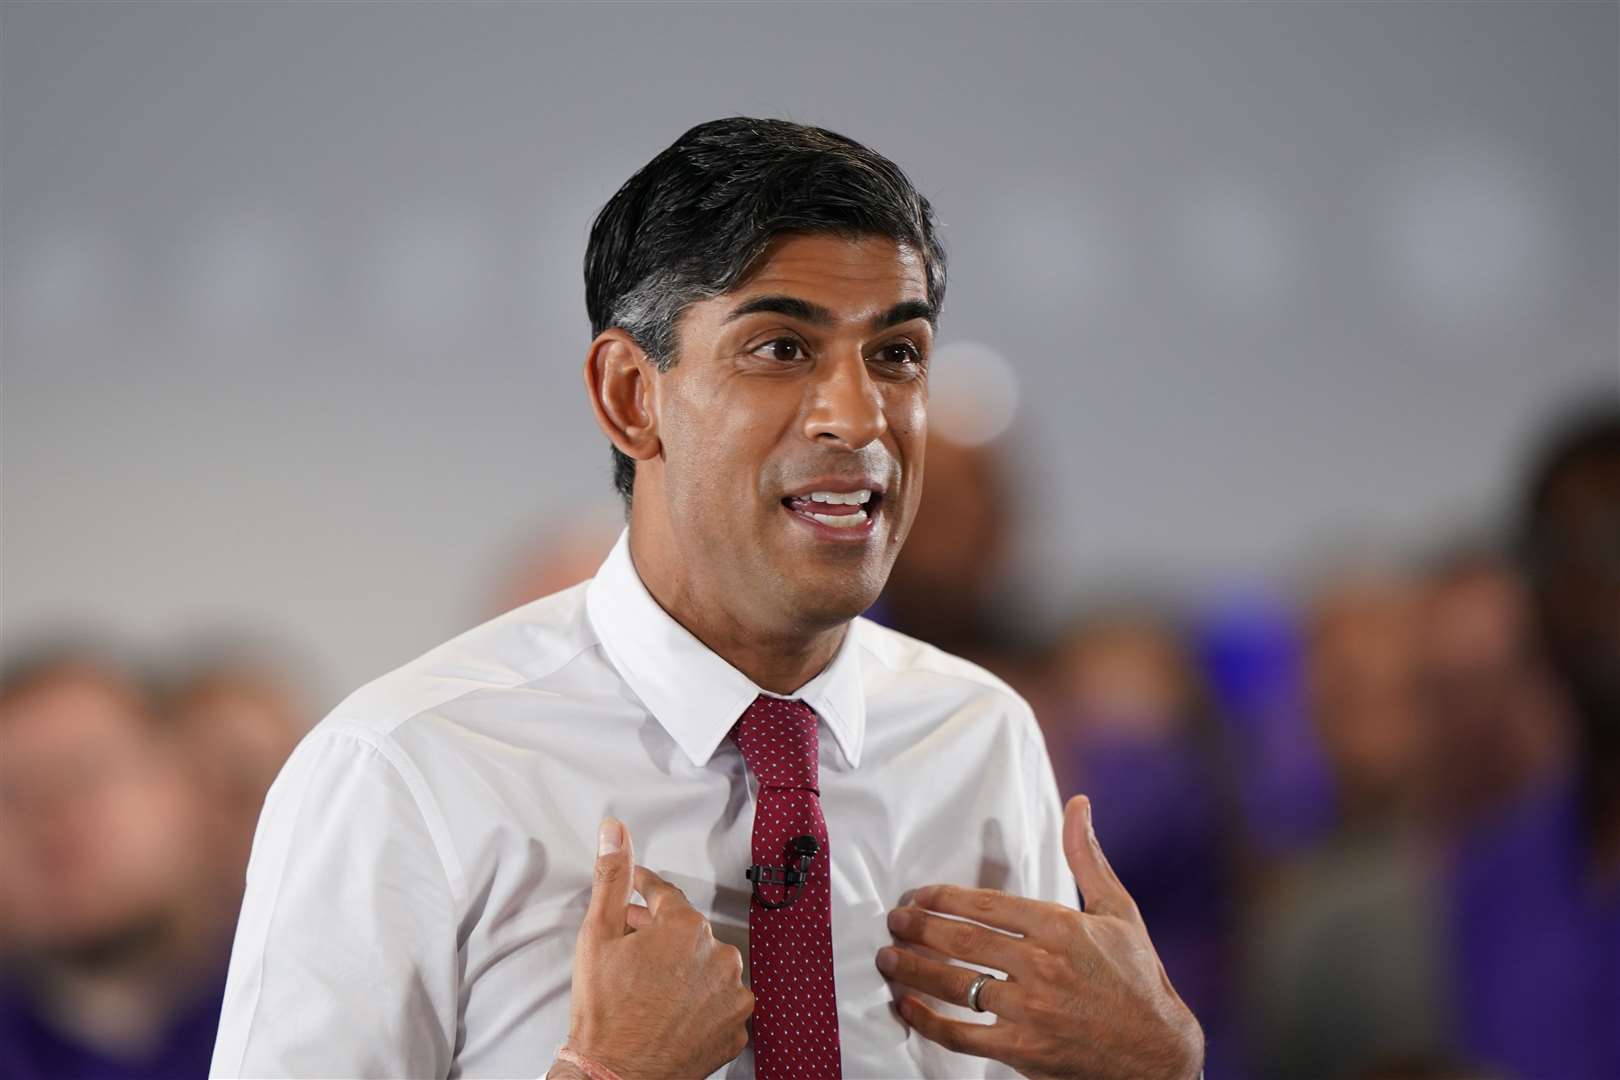 Rishi Sunak said he was ‘delighted’ by the switch (Joe Giddens/PA)